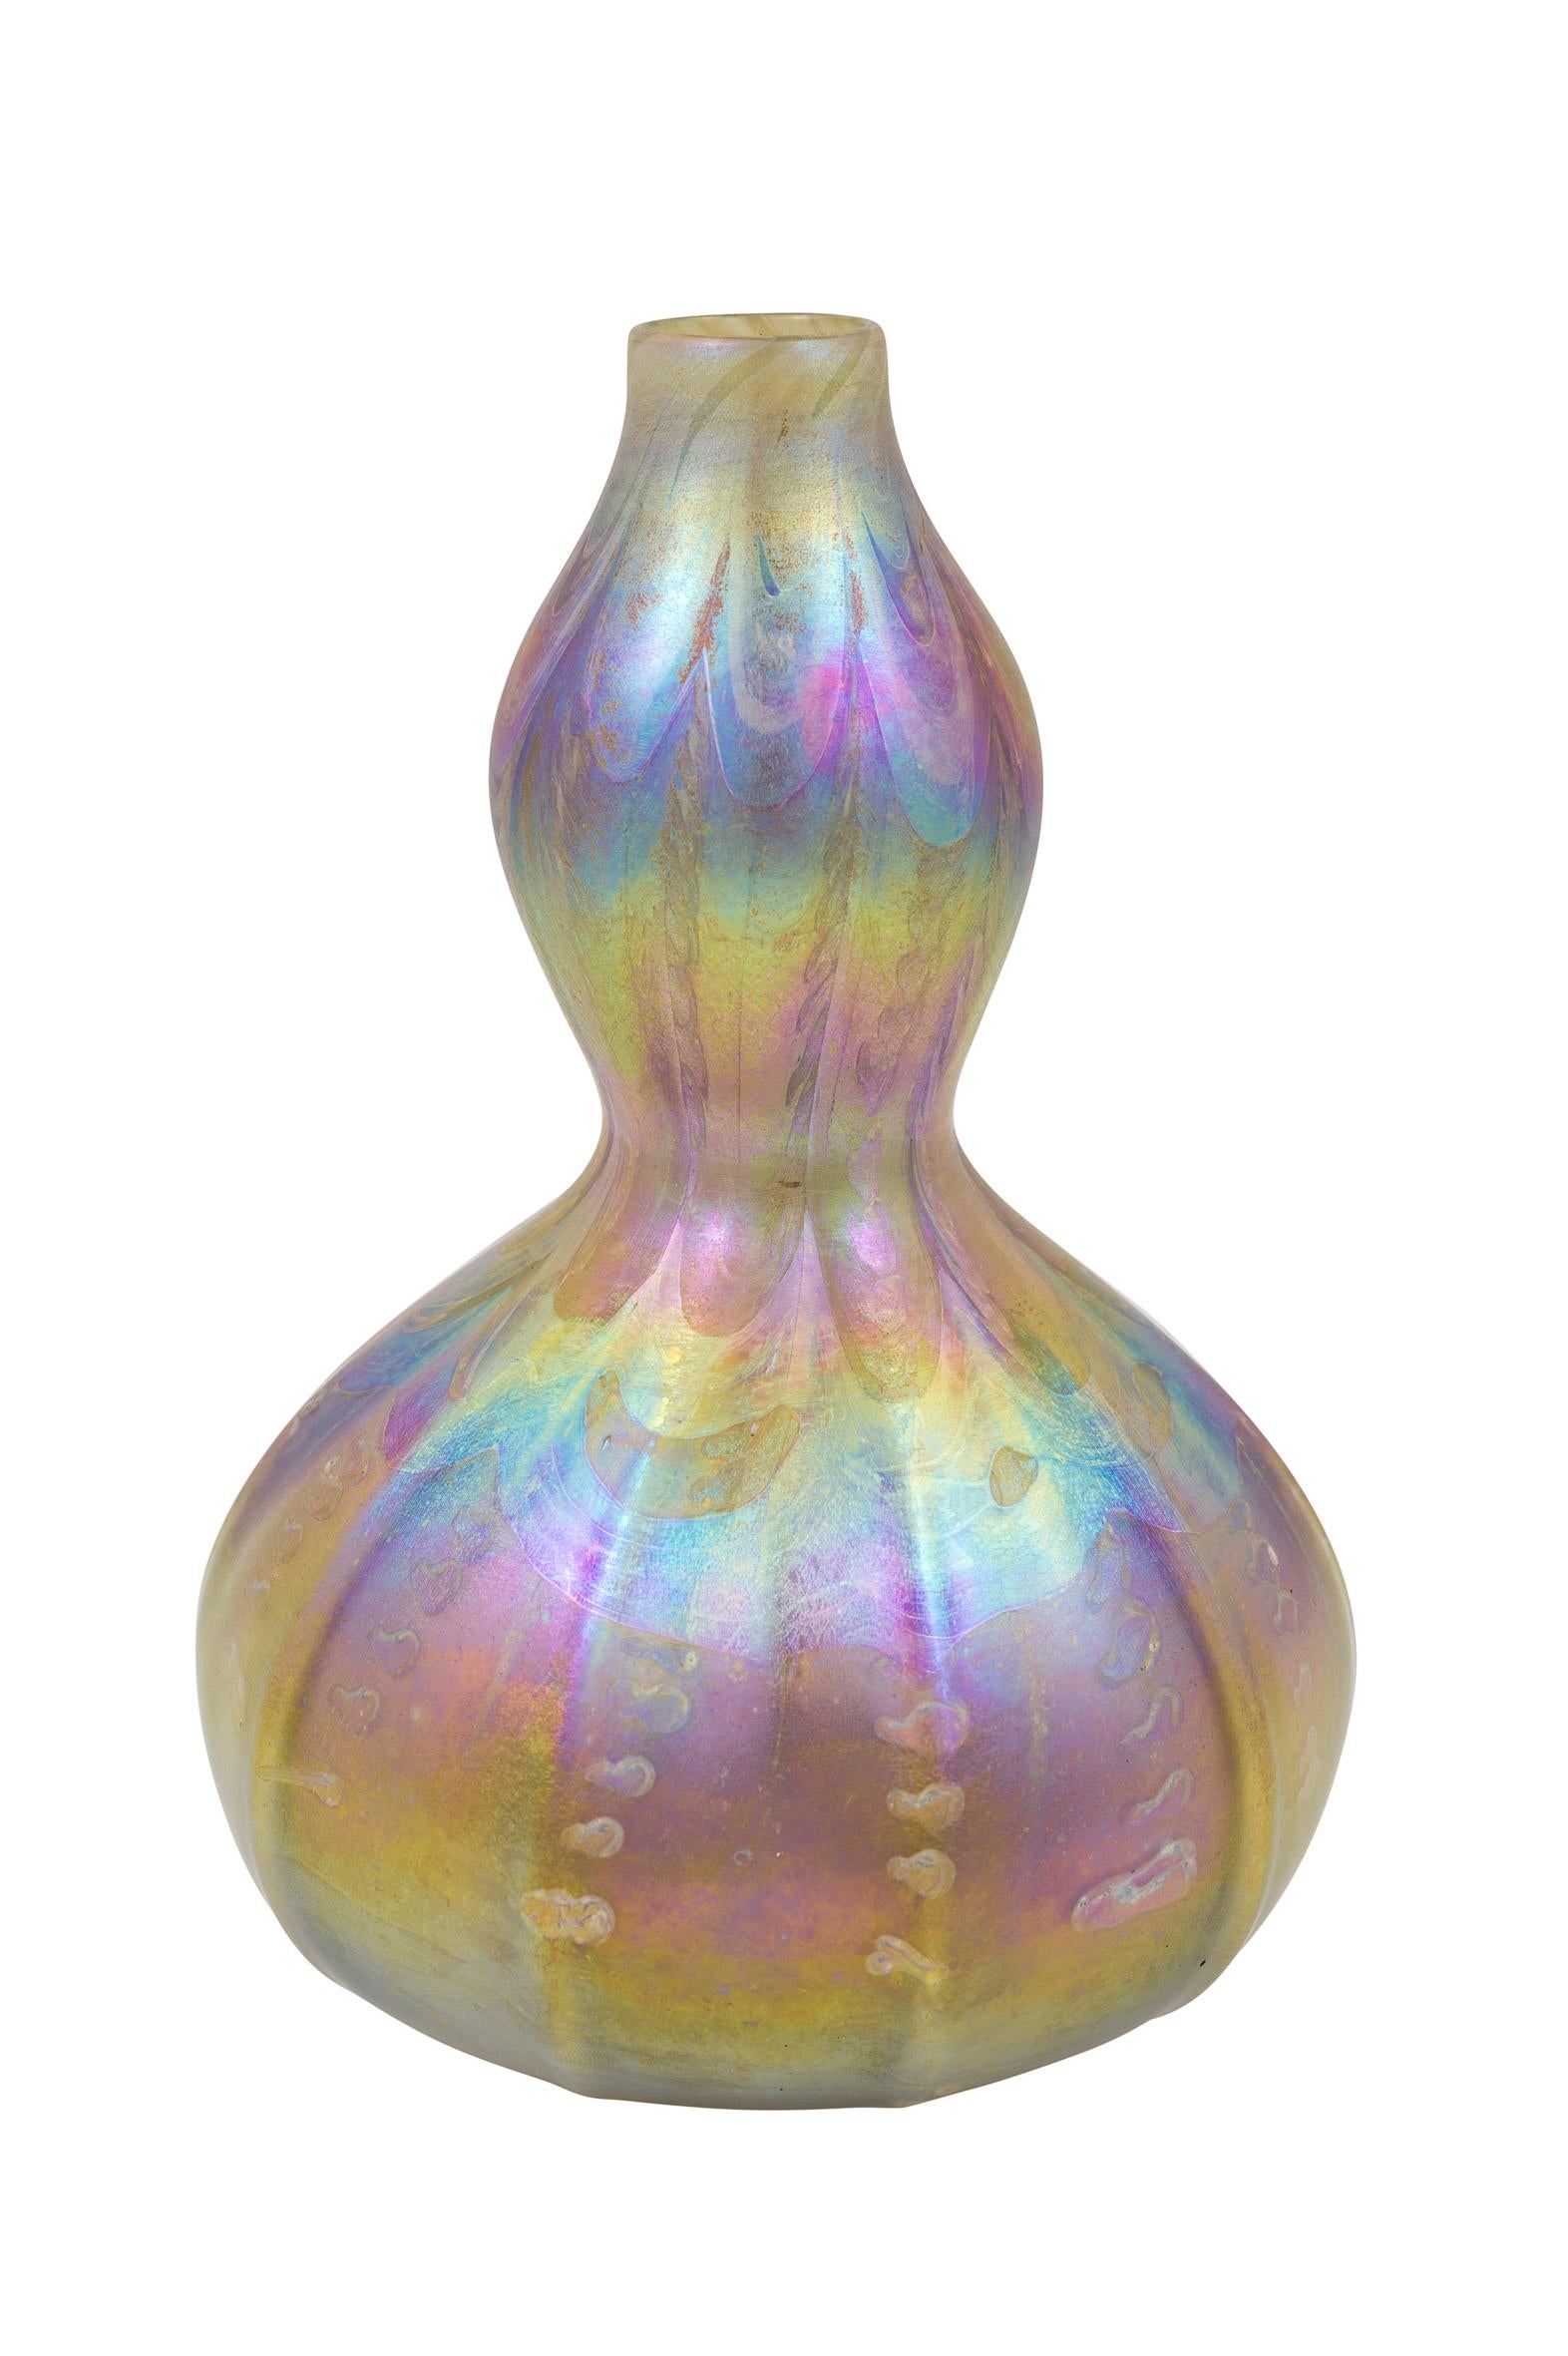 Glass vase designed by Louis C. Tiffany, manufactured by Tiffany Studios New York, 1894, signed

signed 